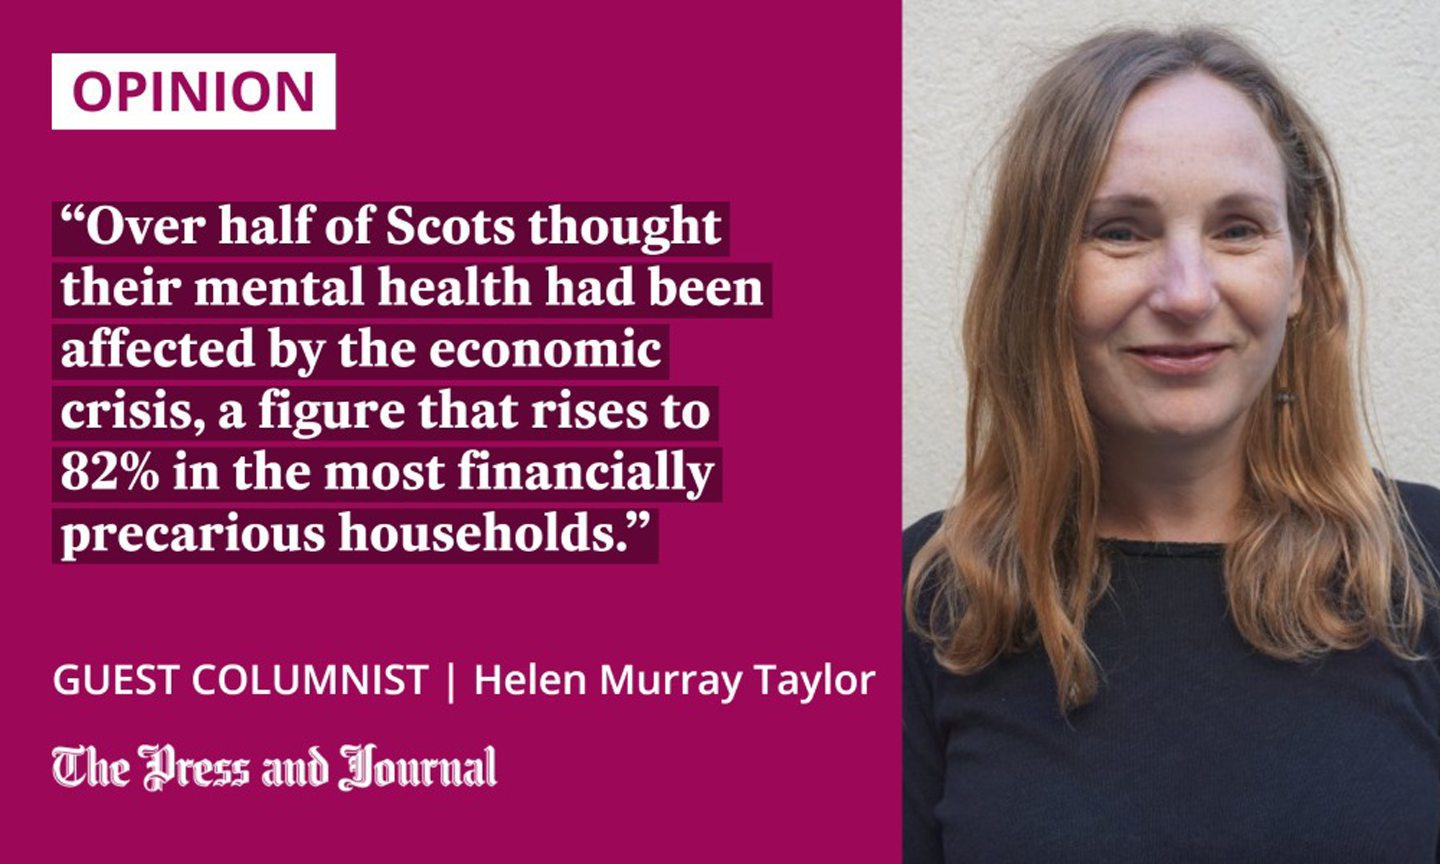 Quotation from guest columnist Helen Murray Taylor: "Over half of Scots thought their mental health had been affected by the economic crisis, a figure that rises to 82% in the most financially precarious households."